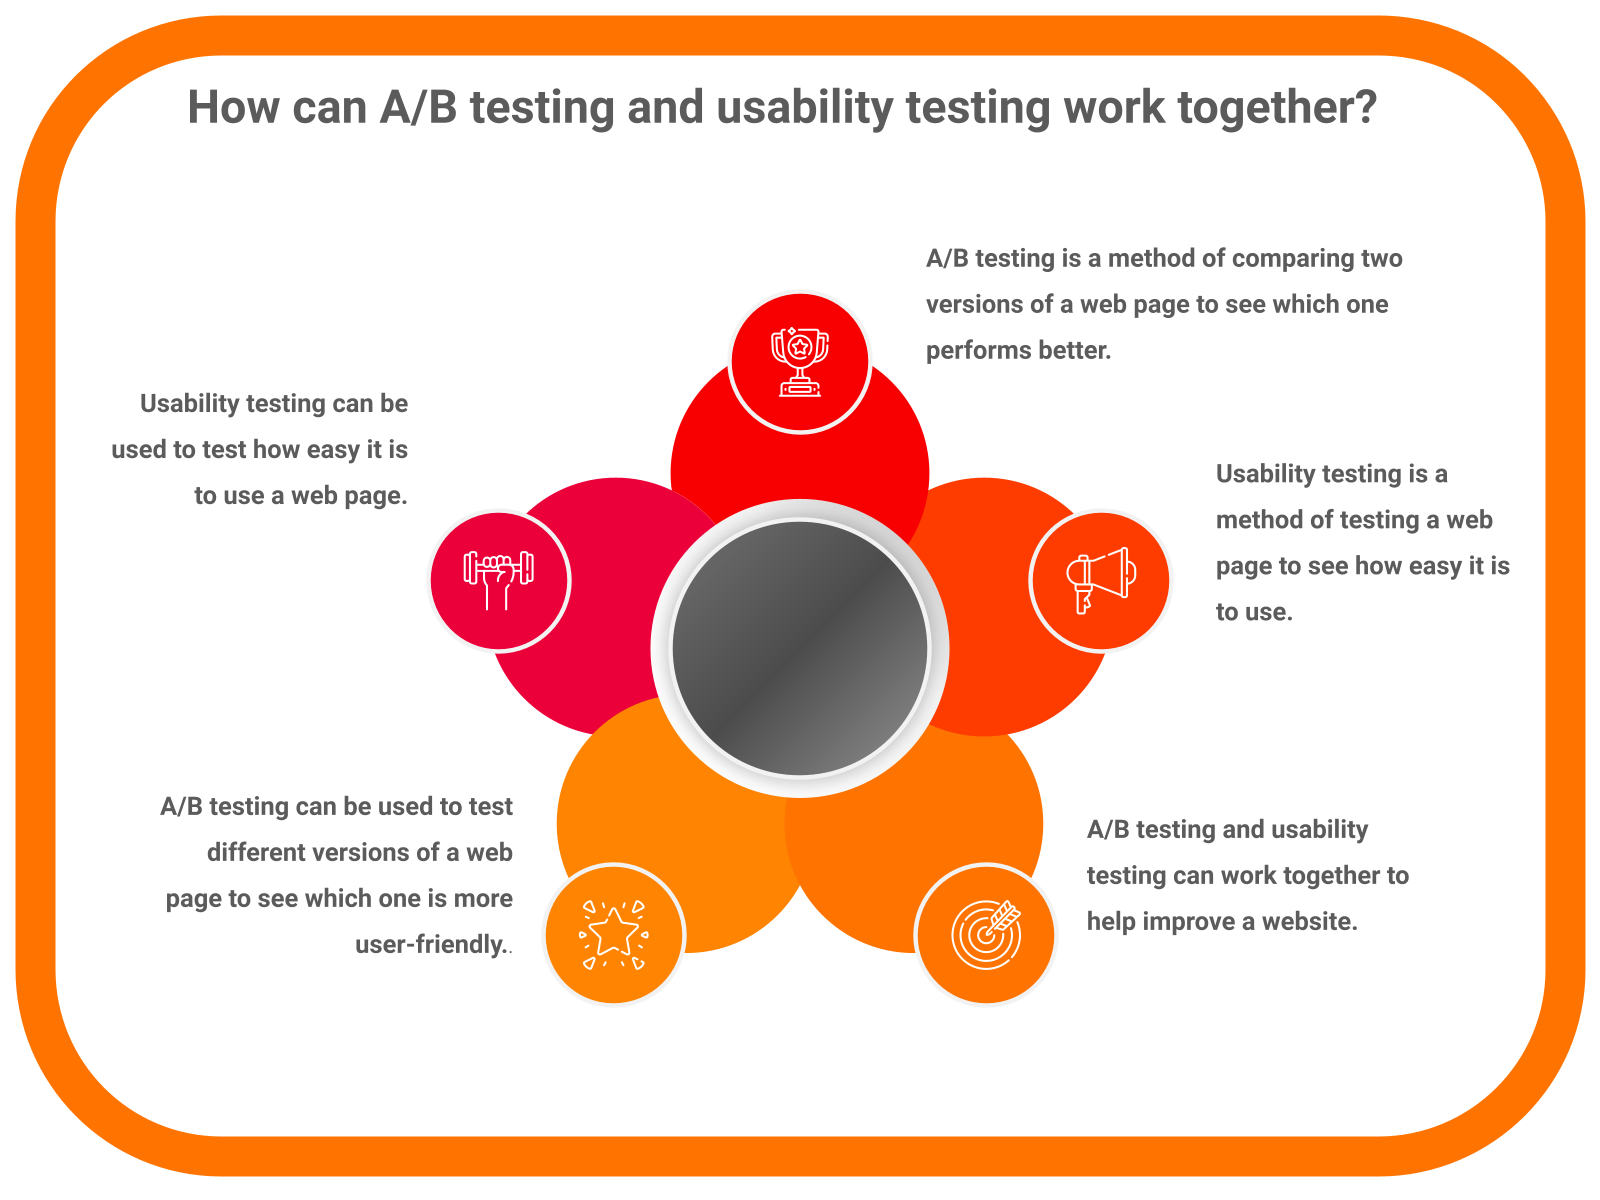 How can A/B testing and usability testing work together?